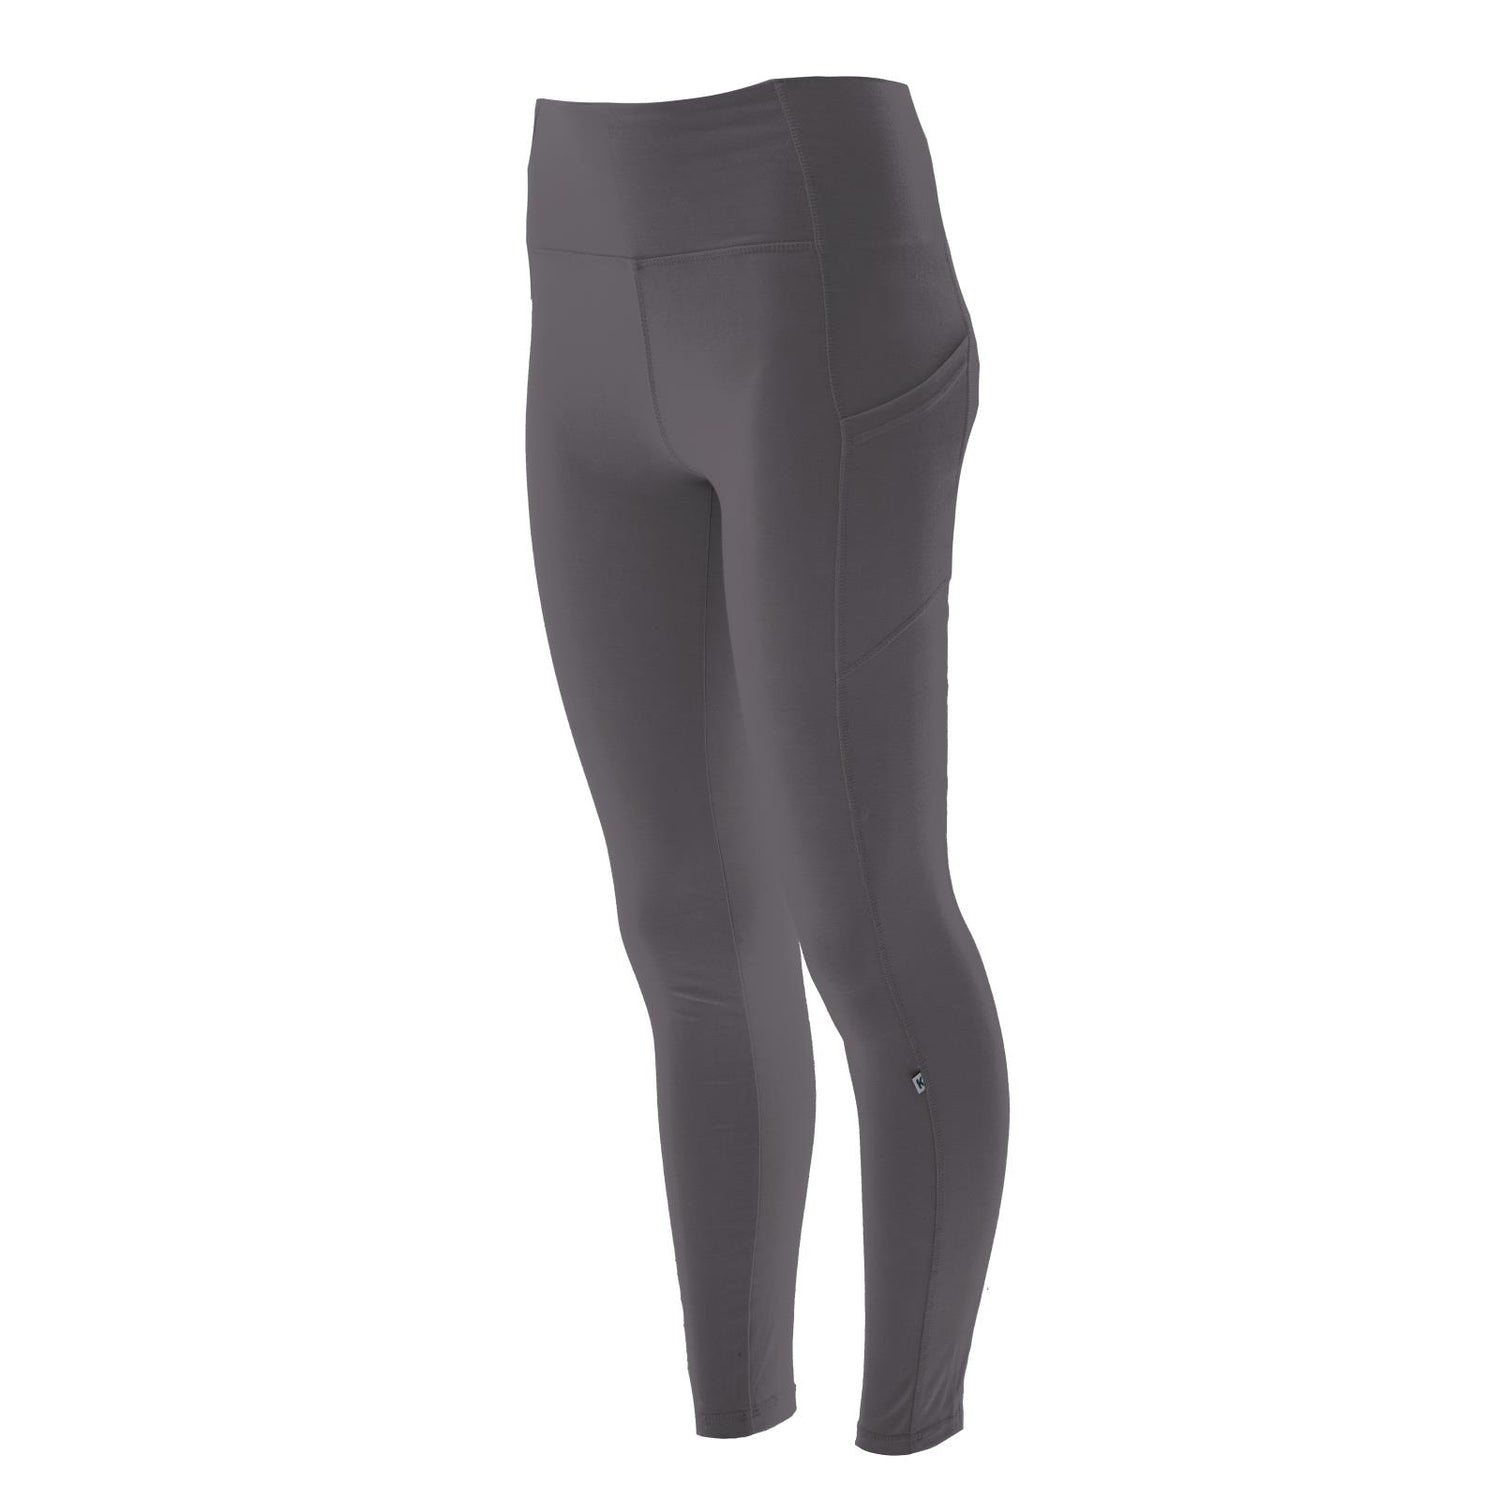 Women's Luxe Stretch Leggings with Pockets in Rain